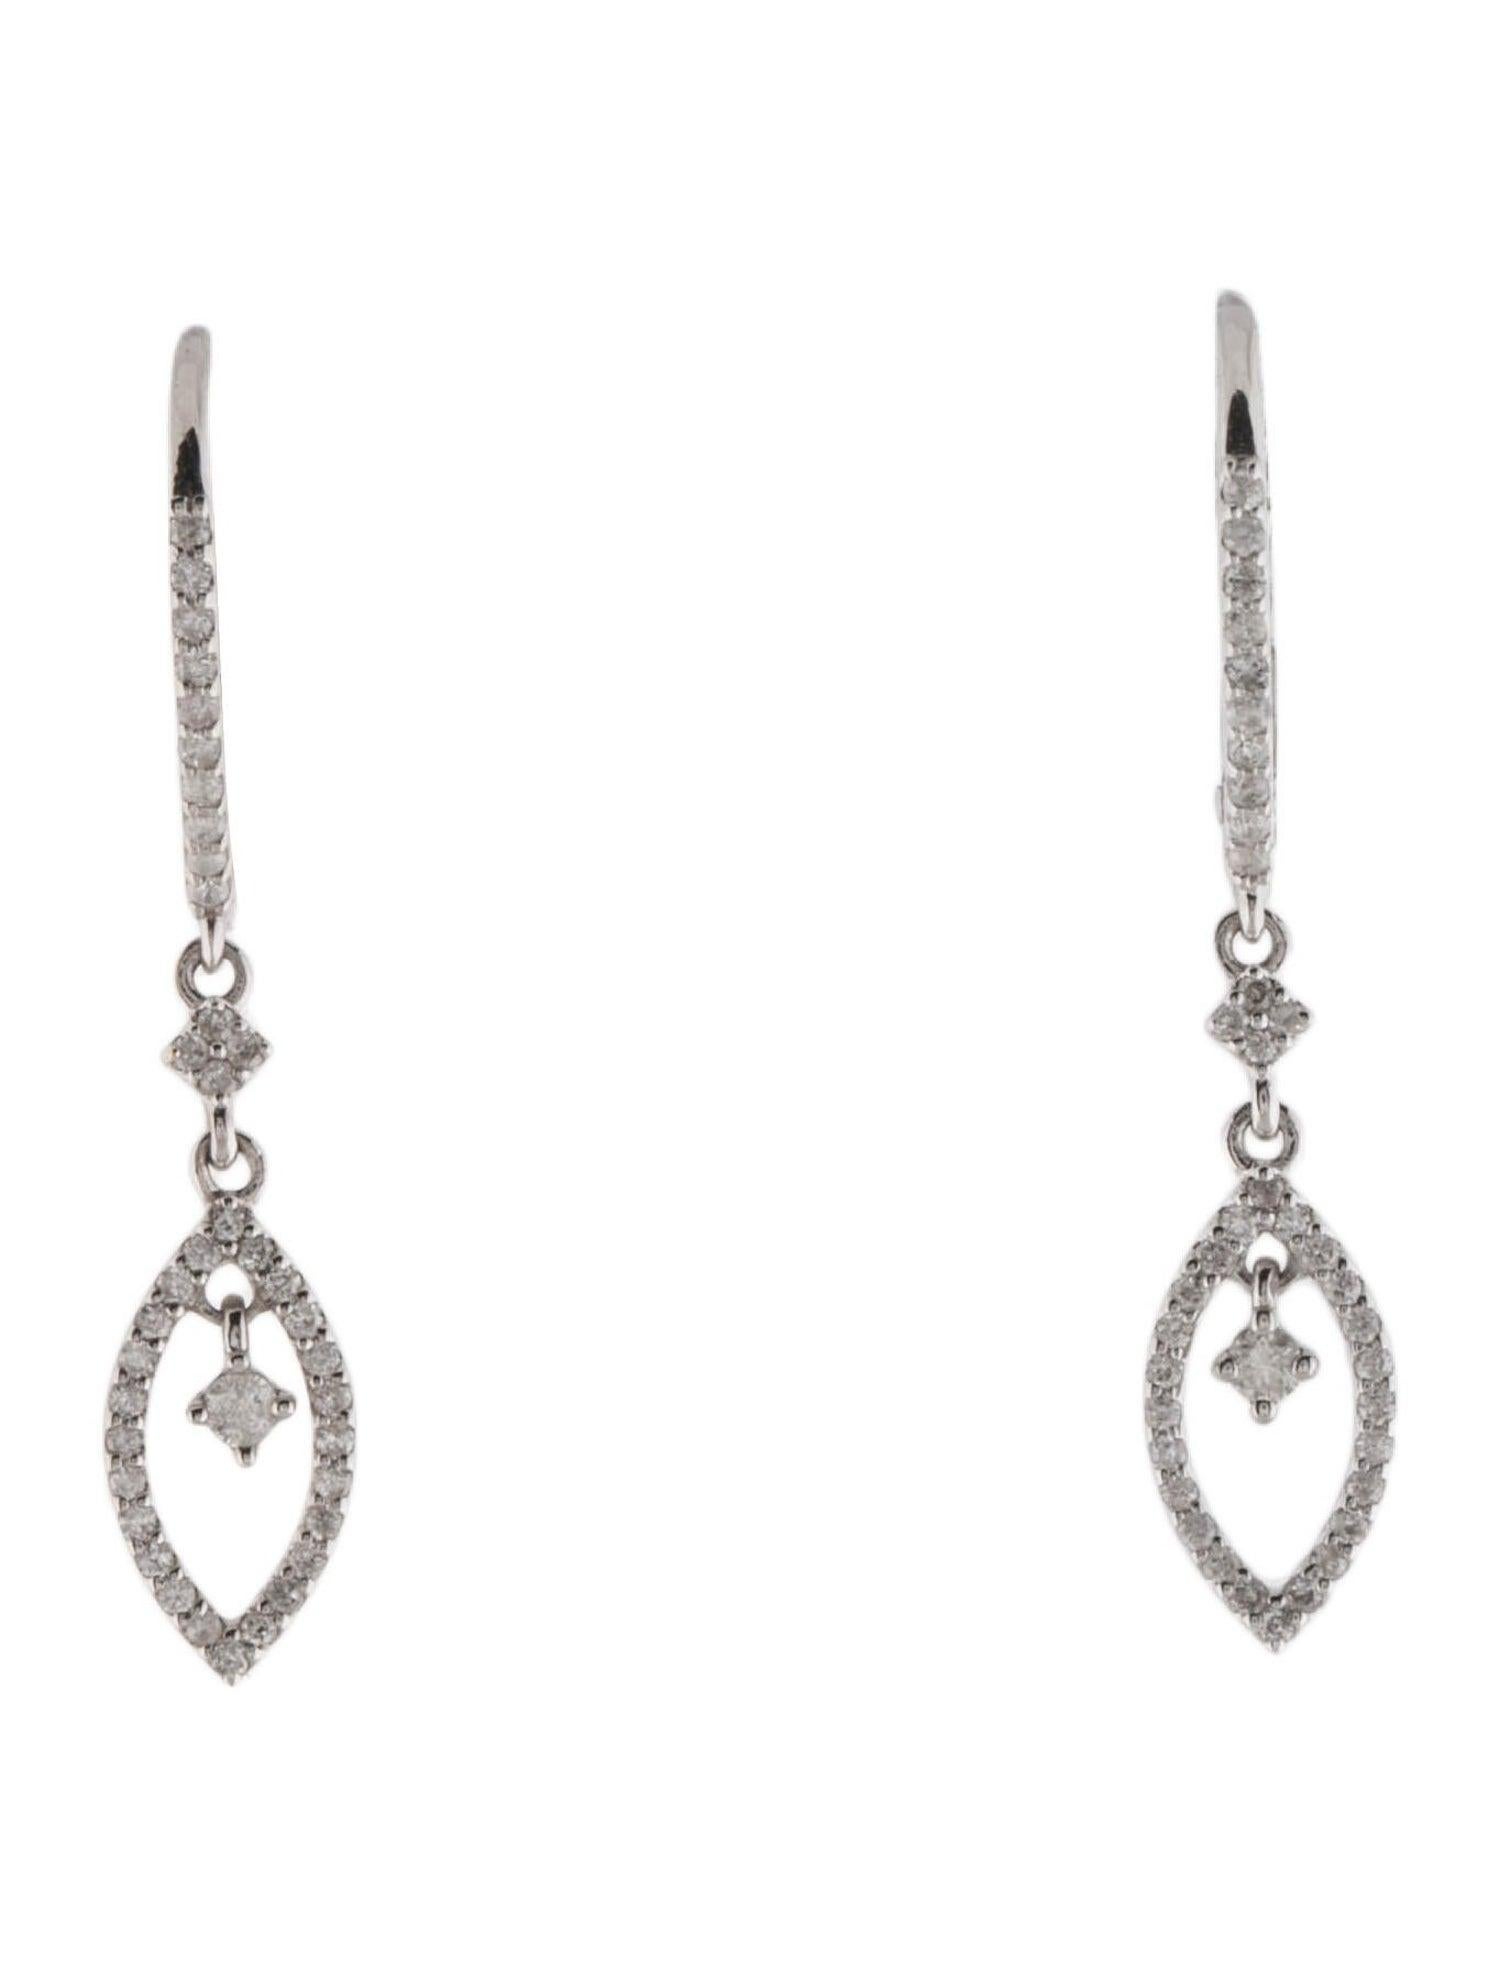 Introducing our exquisite 14K White Gold Rhodium-Plated Diamond Drop Earrings, a captivating addition to any fine jewelry collection. These earrings feature 78 round brilliant cut diamonds, totaling 0.29 carats, set in beautifully rhodium-plated 14K